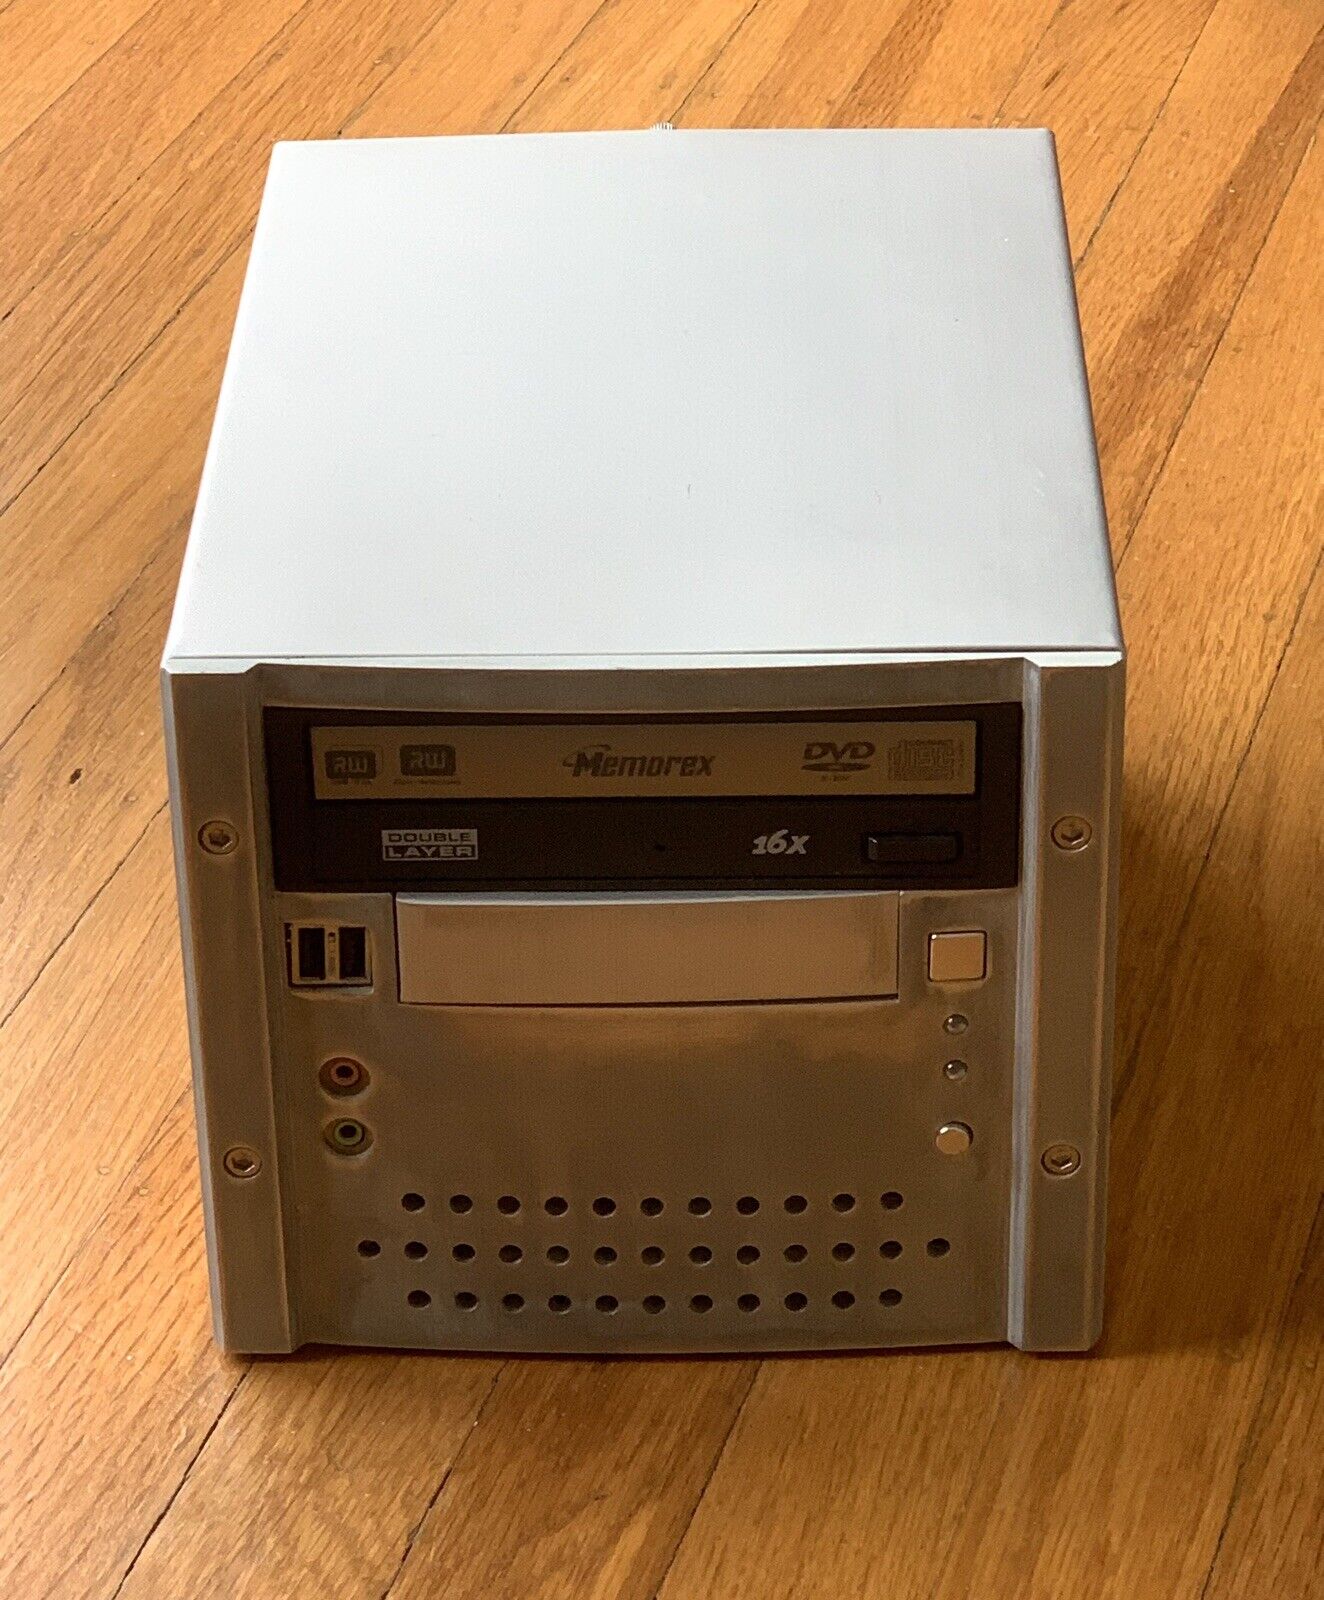 Extremely Rare Vintage Collectable Computer - Shuttle Spacewalker SV24 XPC